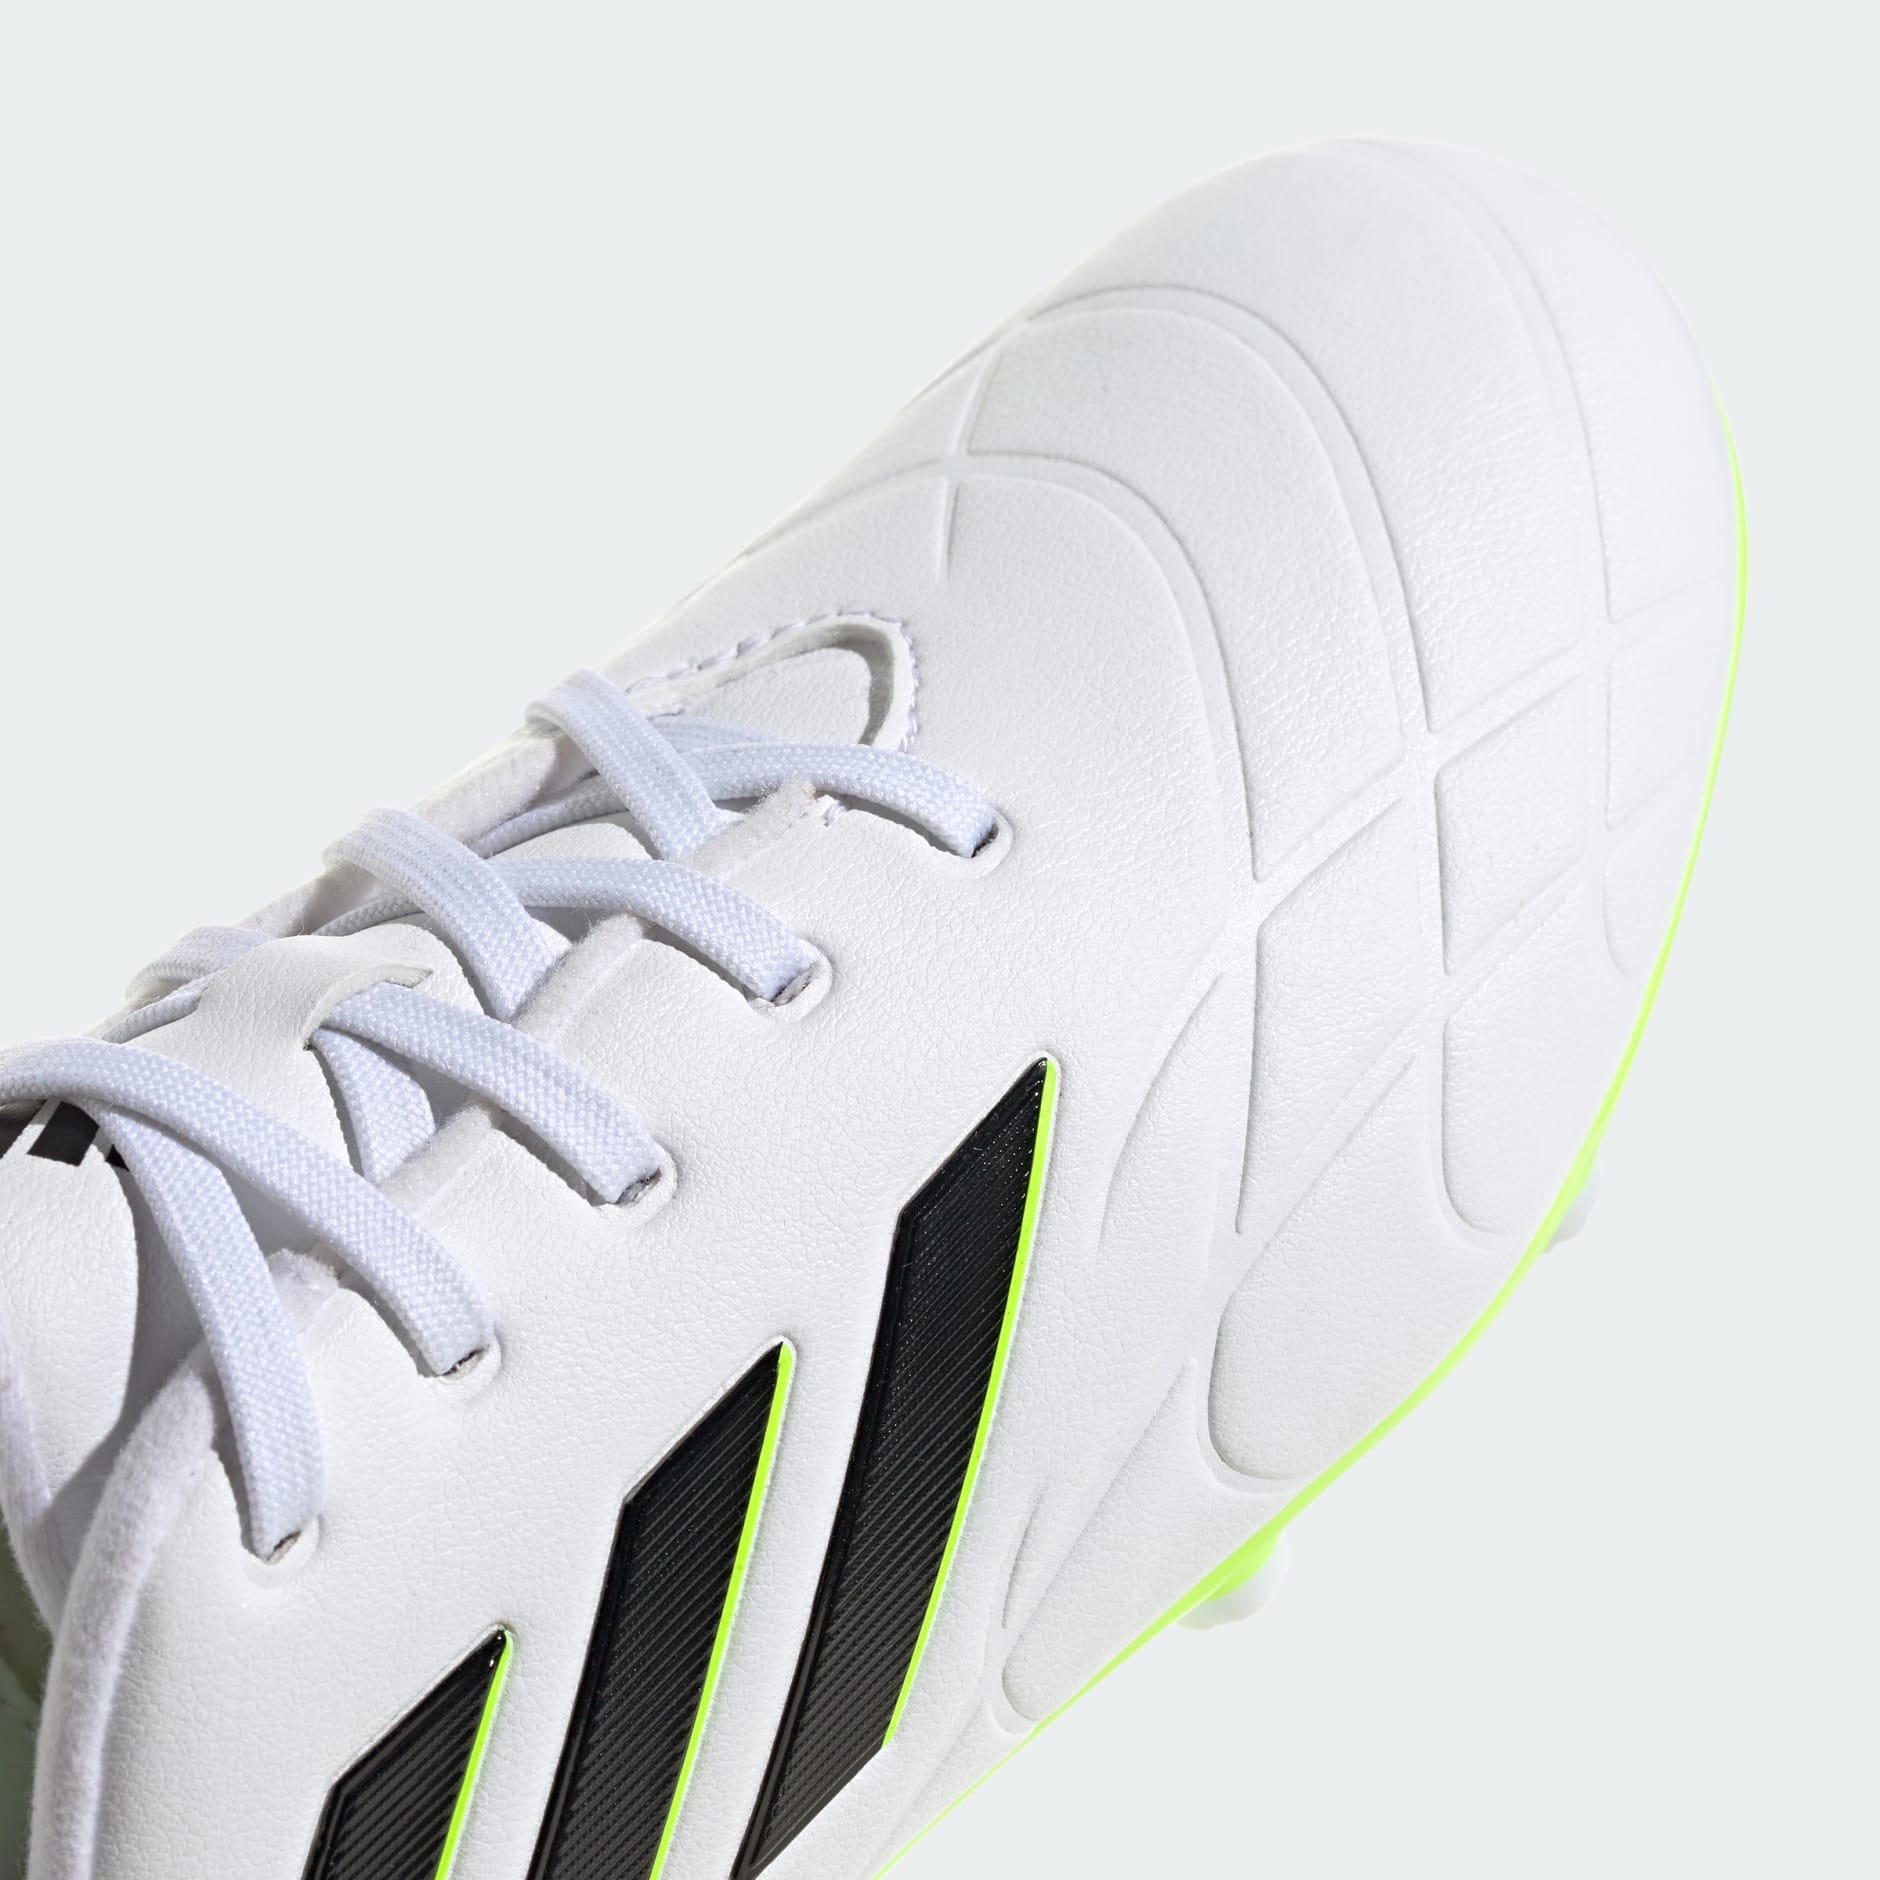 adidas Copa Pure II.3 Firm Ground Boots - White | adidas GH